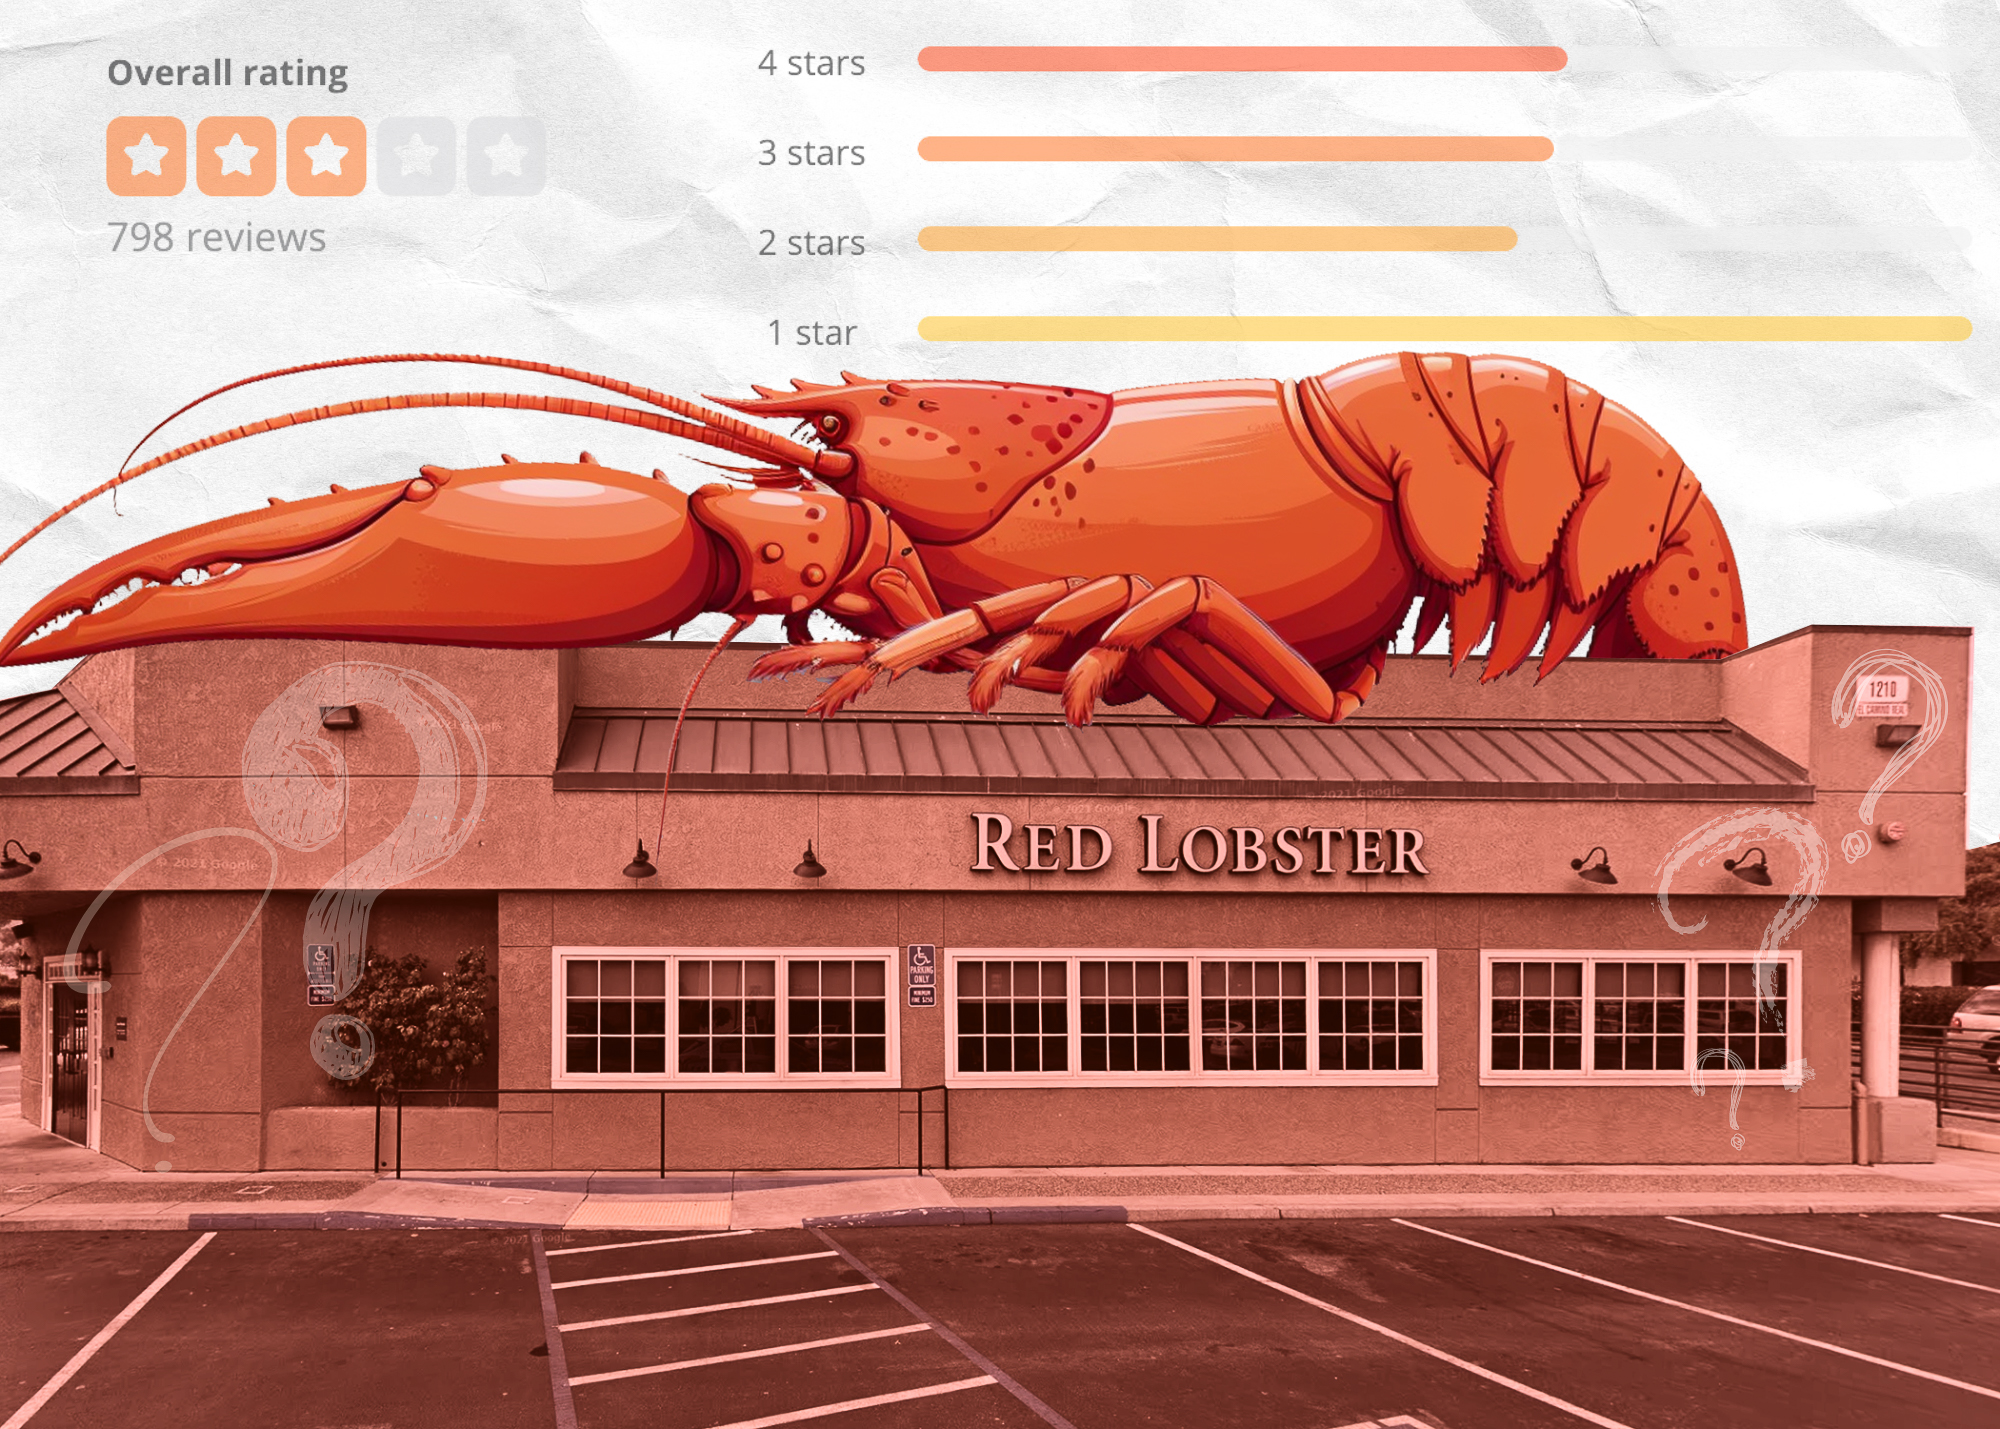 The image shows a Red Lobster restaurant with an illustrated giant lobster perched on its roof and star ratings displayed above, indicating a 3-star average from 798 reviews.